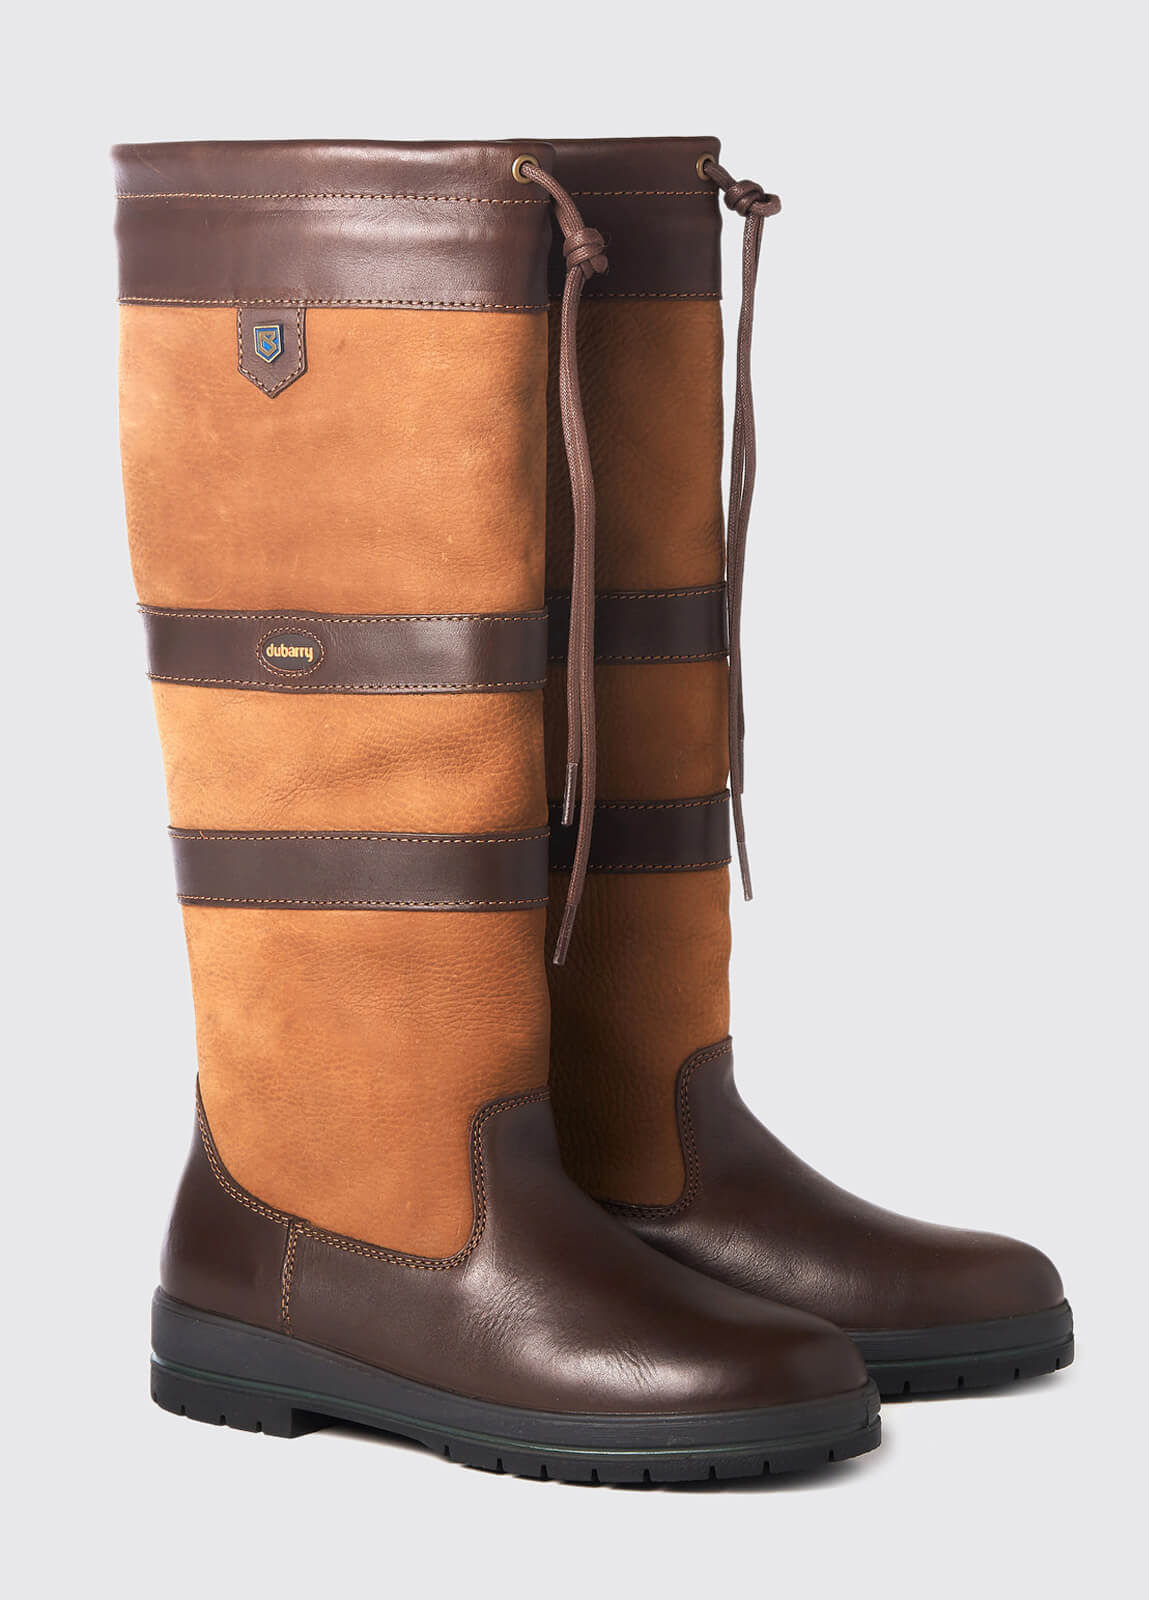 dubarry boot cleaner